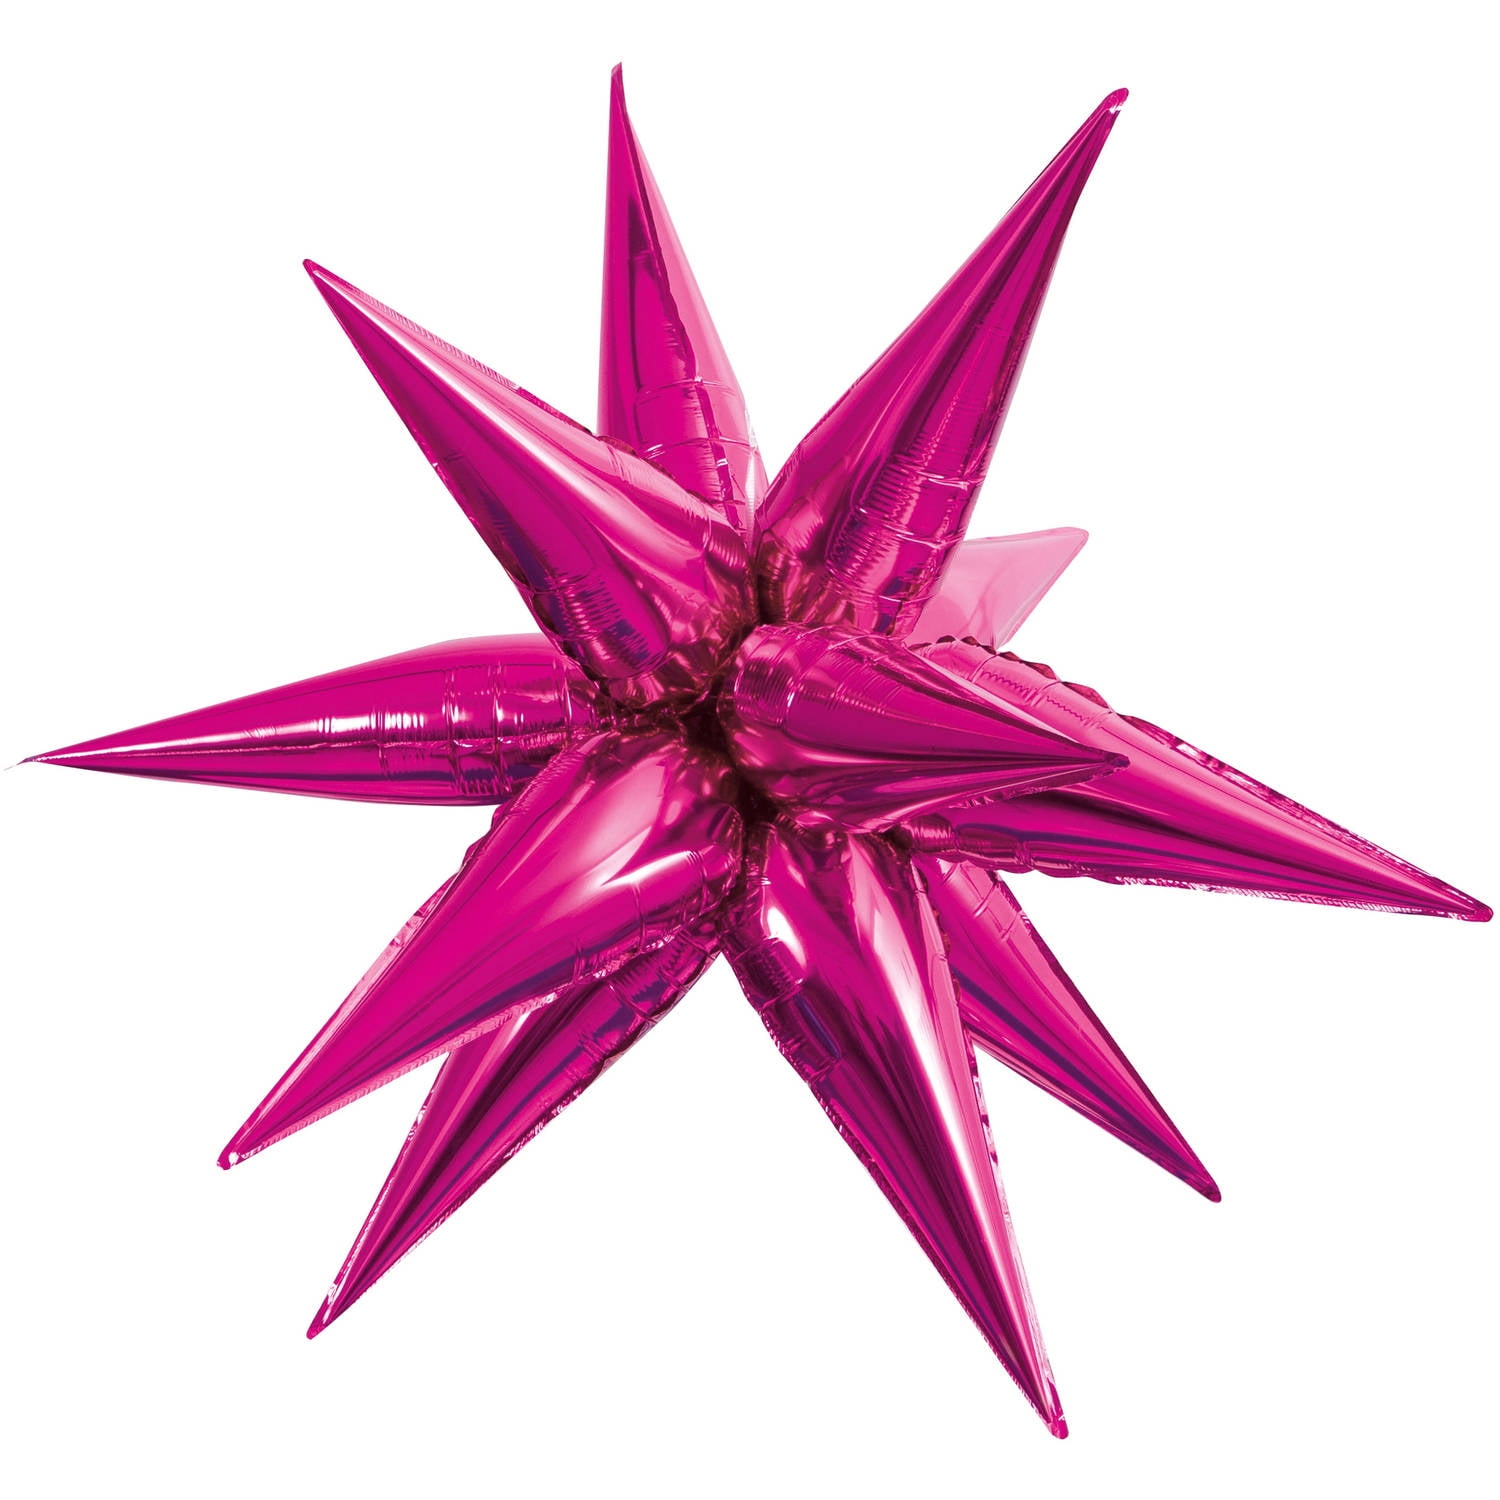 18" HOT PINK STAR SHAPE HELIUM FOIL BALLOON PARTY SUPPLIES DECORATION